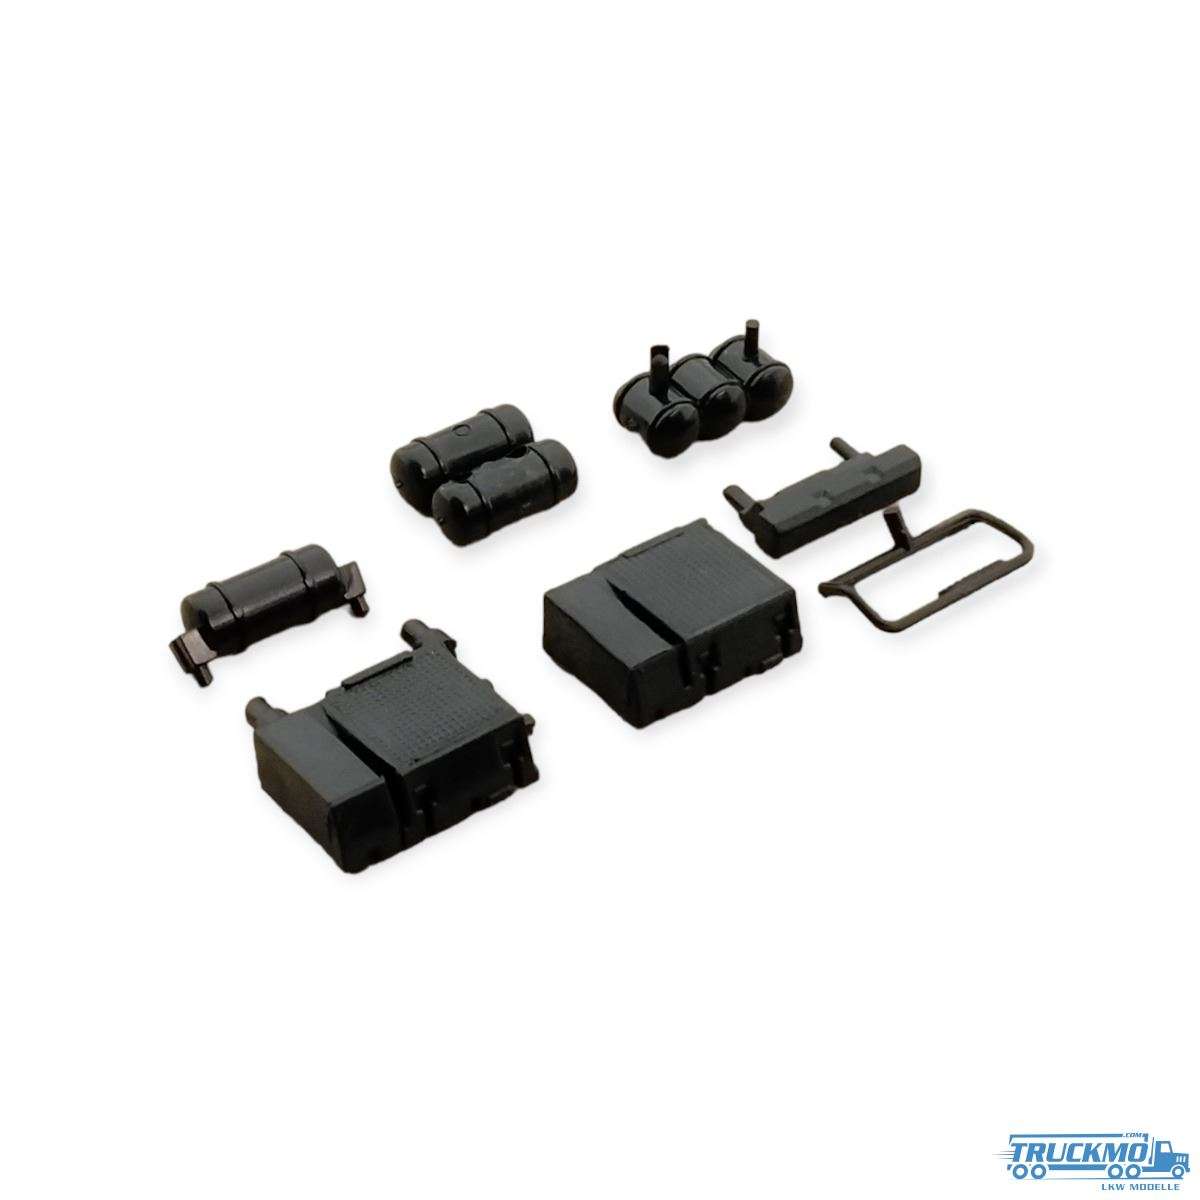 Tekno Parts Scania 3 series battery box + airdrum set 80123